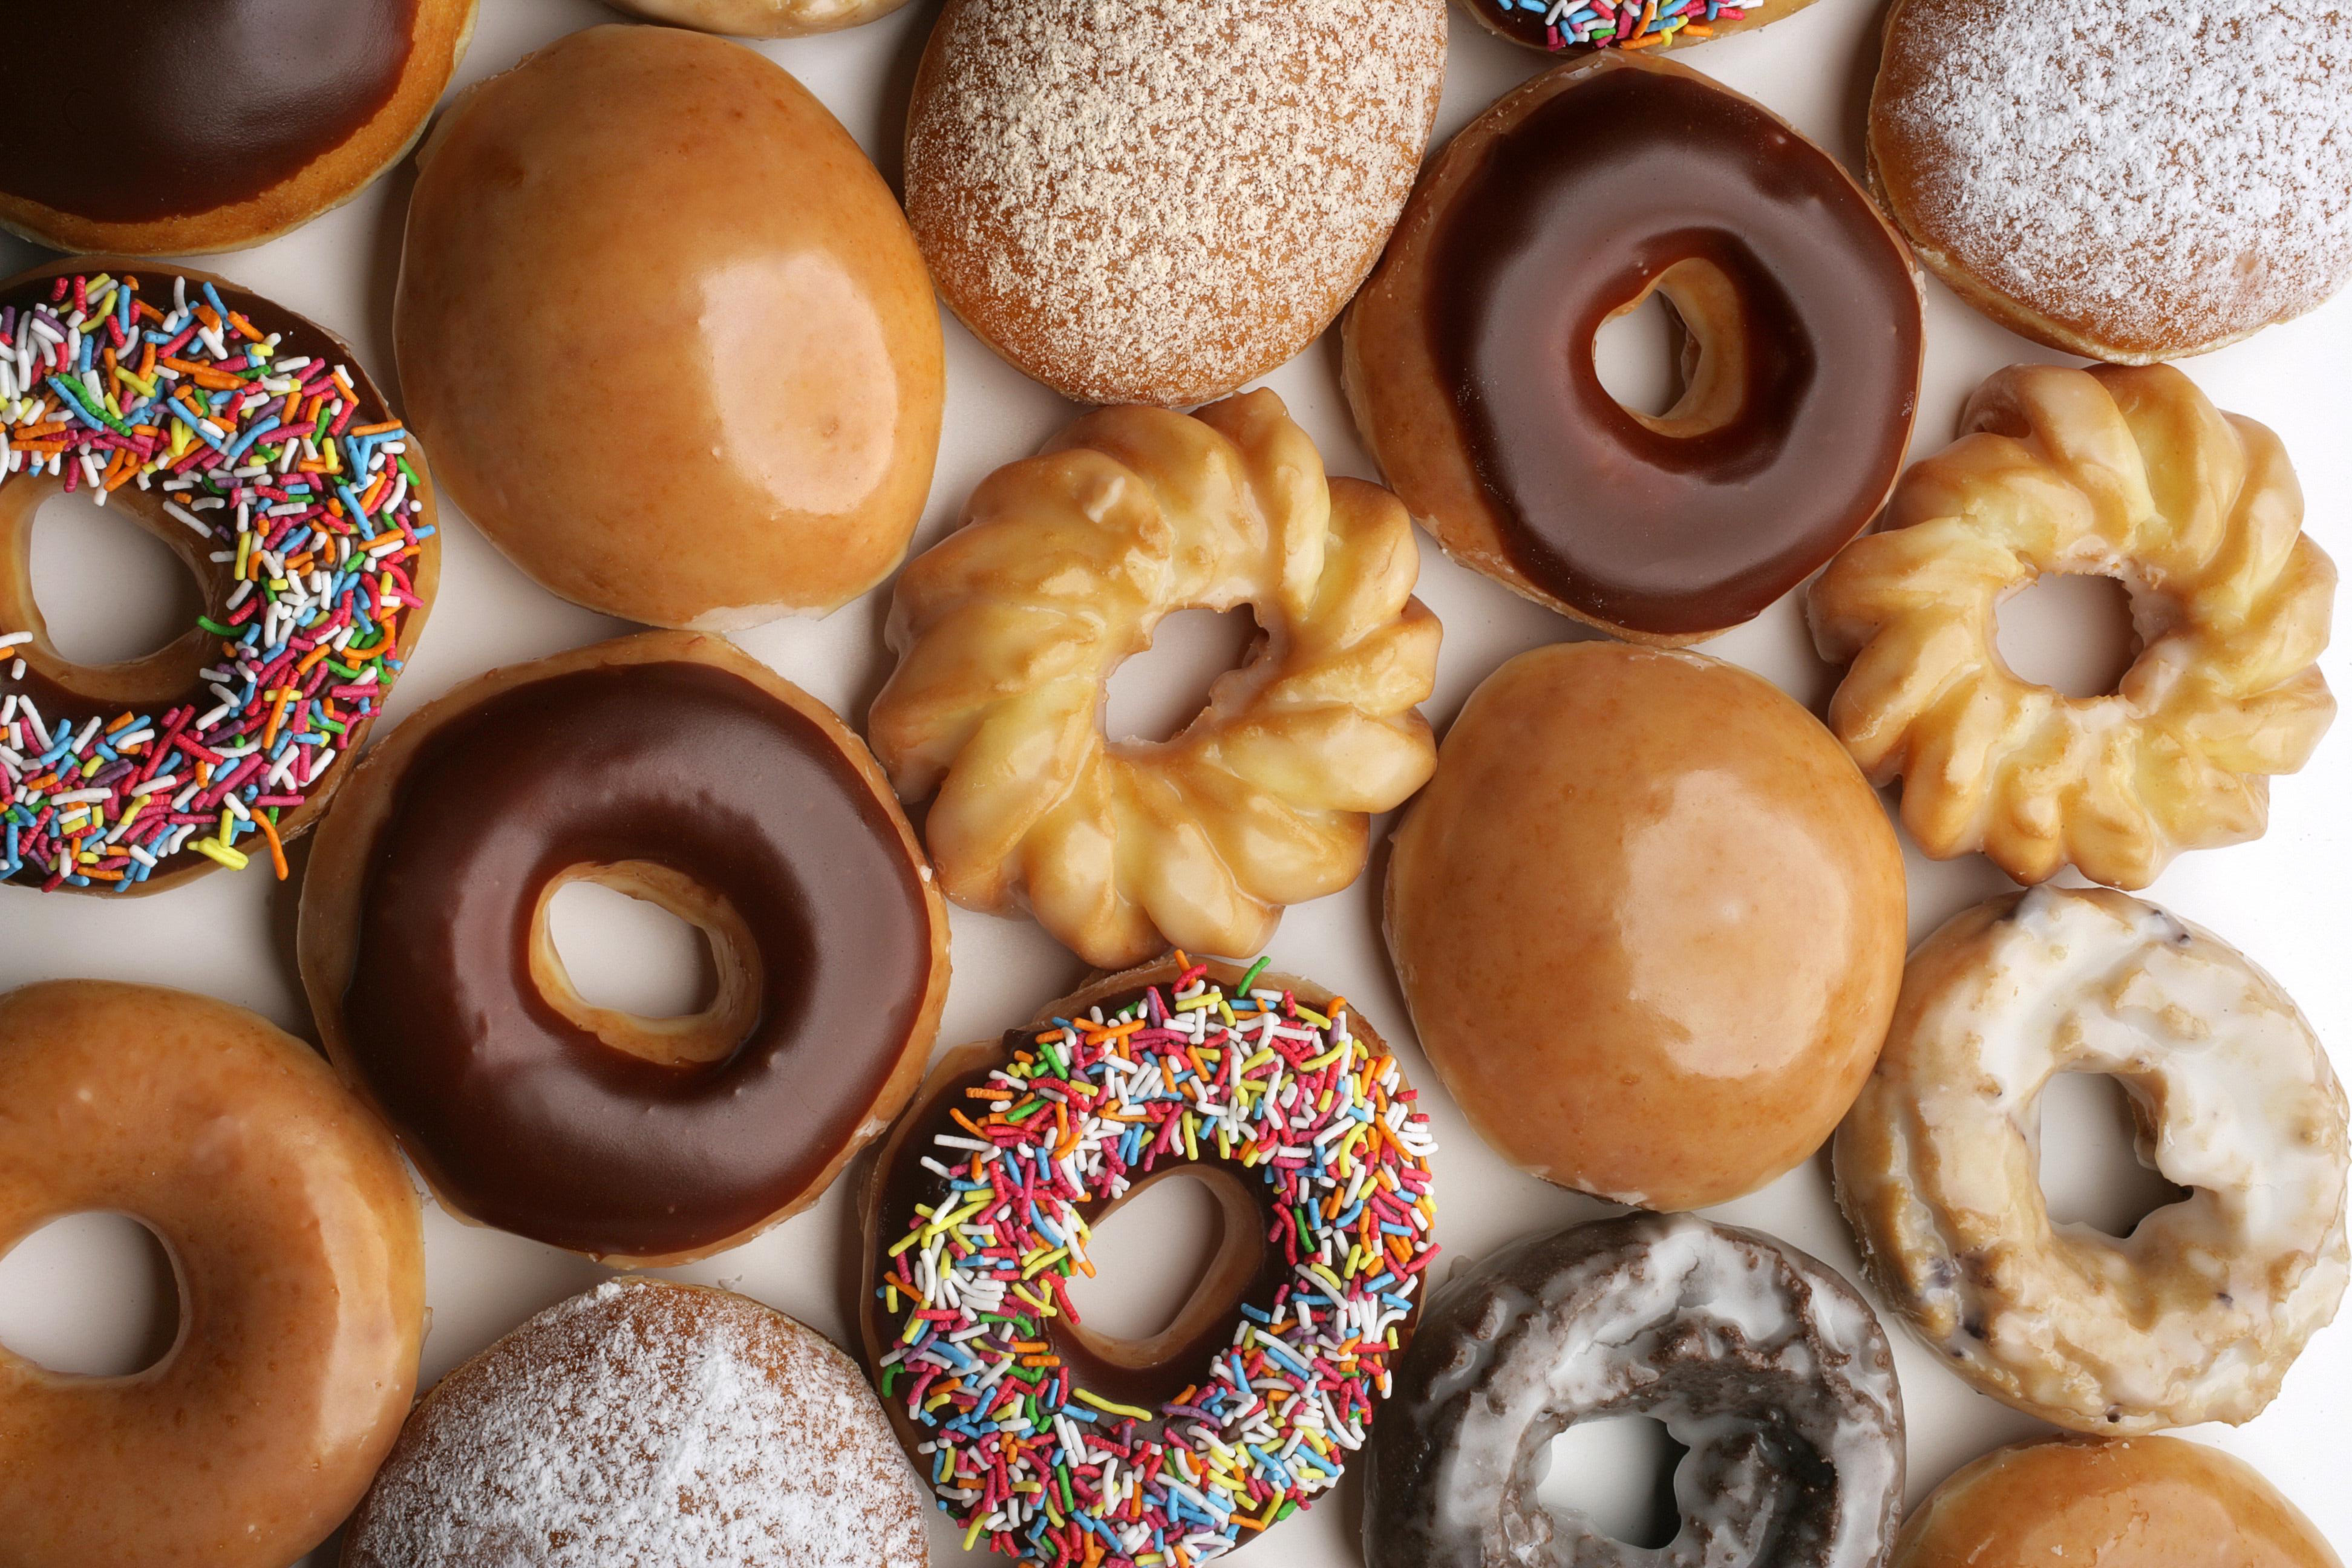 The Krispy Kreme fundraiser is a great way for college organizations to raise money.